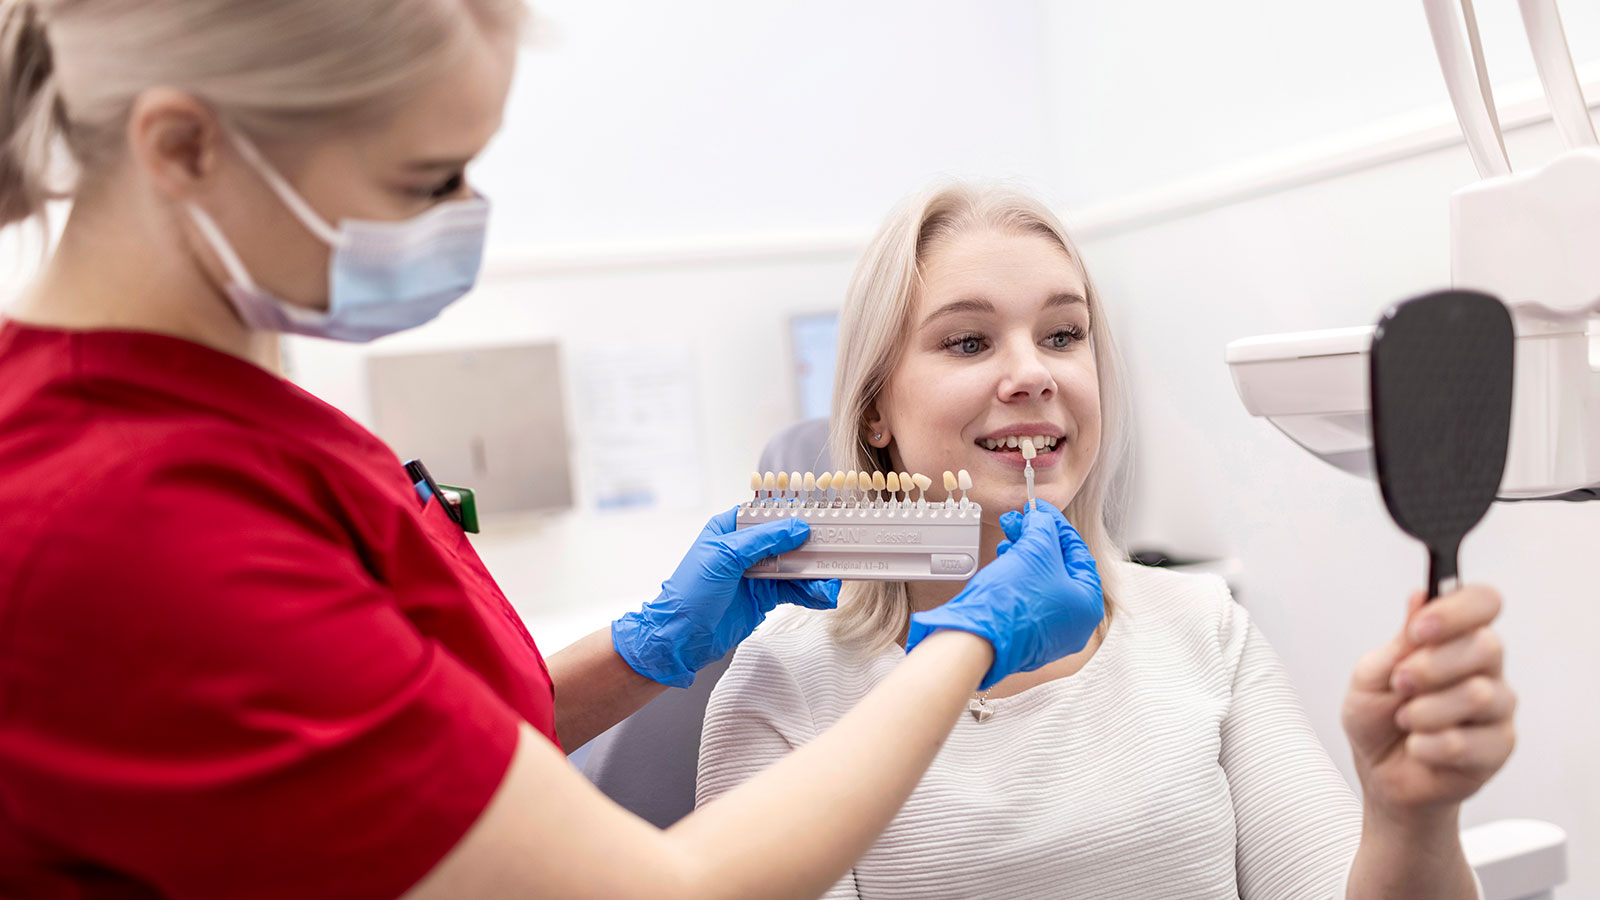 Dental Hygiene student plans teeth whitening with the client.